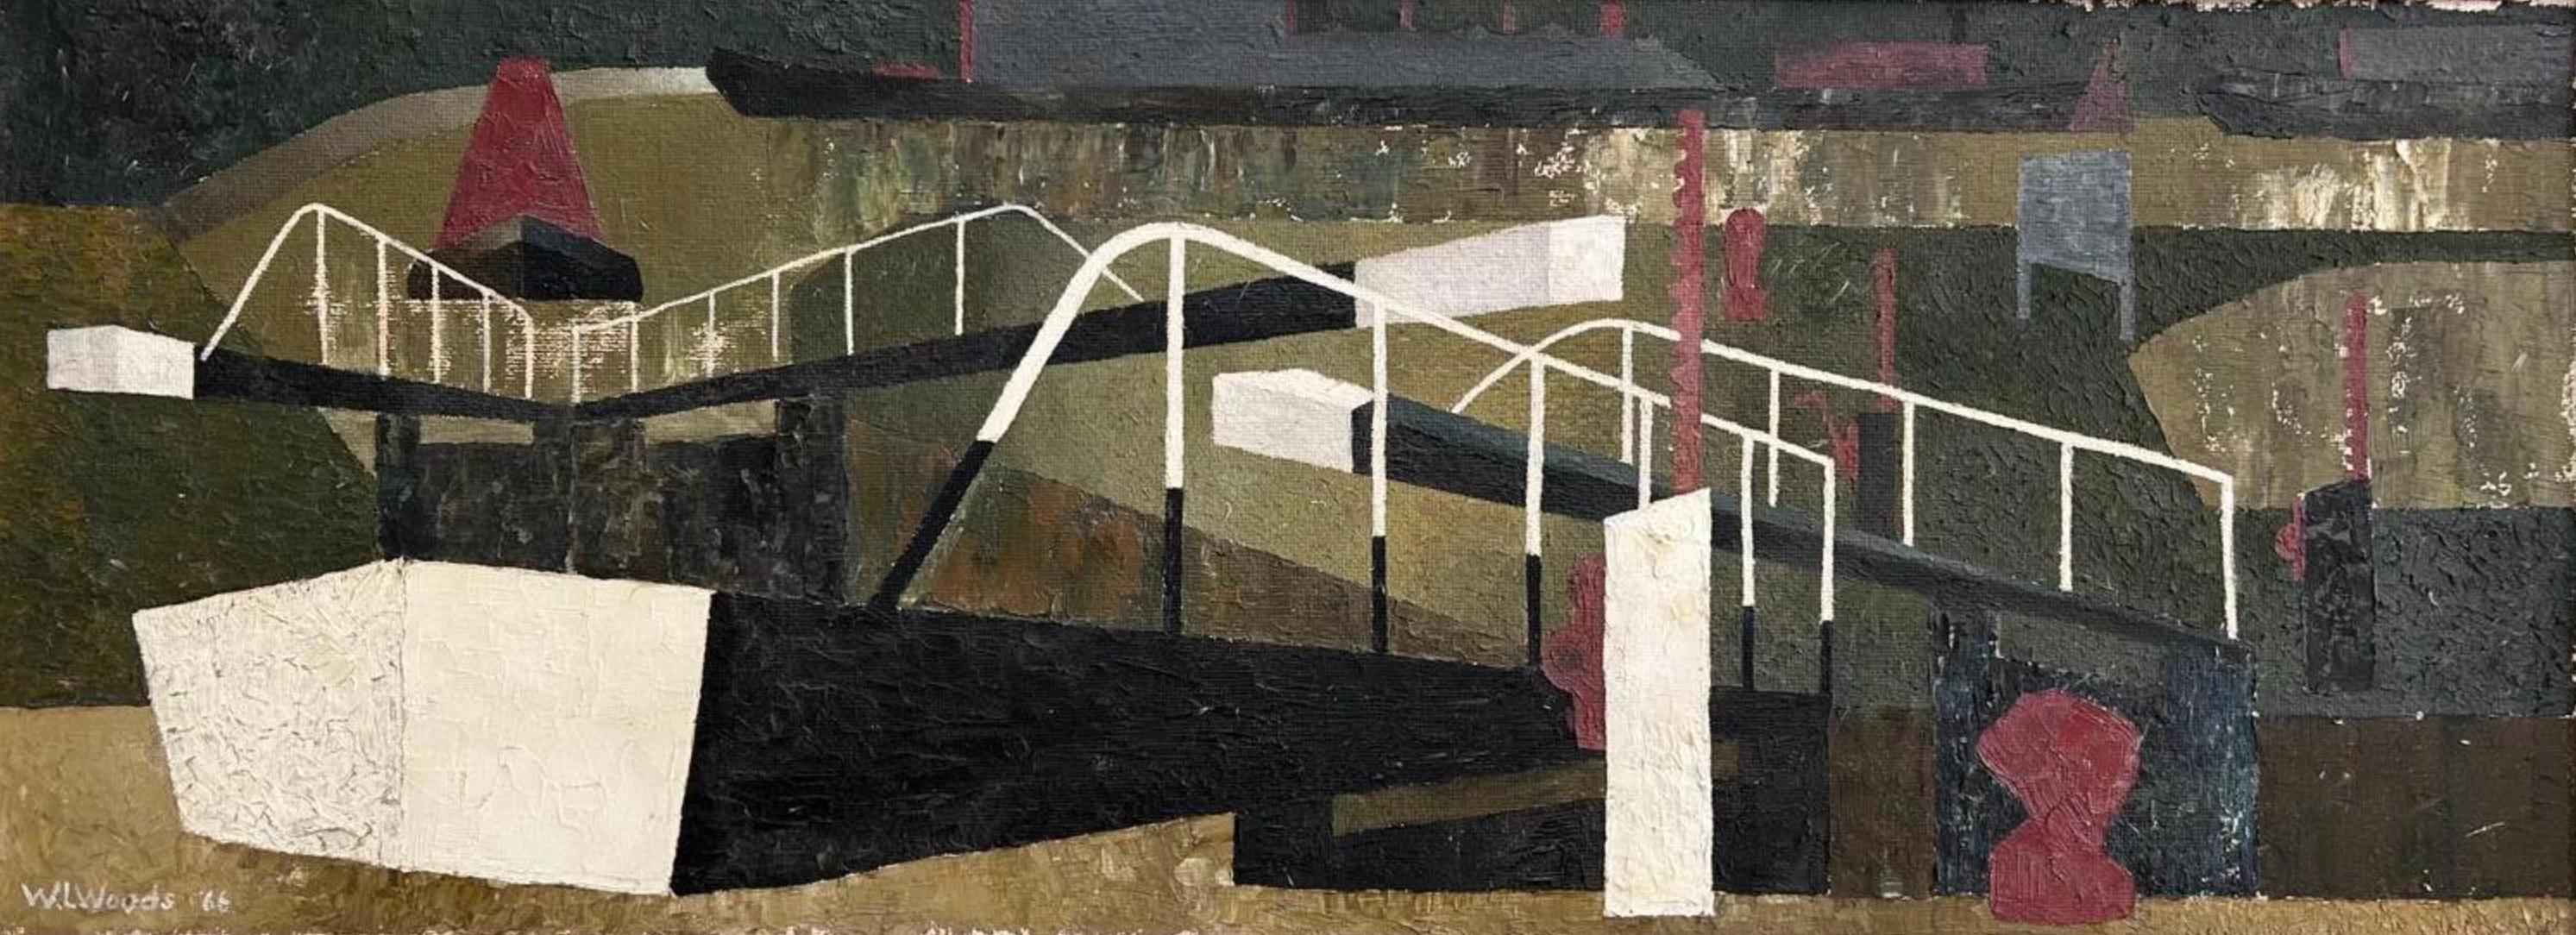 Oil on canvas, signed and dated '66' lower left
Image size: 13 x 35 3/4 inches (33 x 91 cm)
Original frame

Here, the physical forms that make up the water lock and canal boats have been reduced to their simplest shapes. With the angular artistic